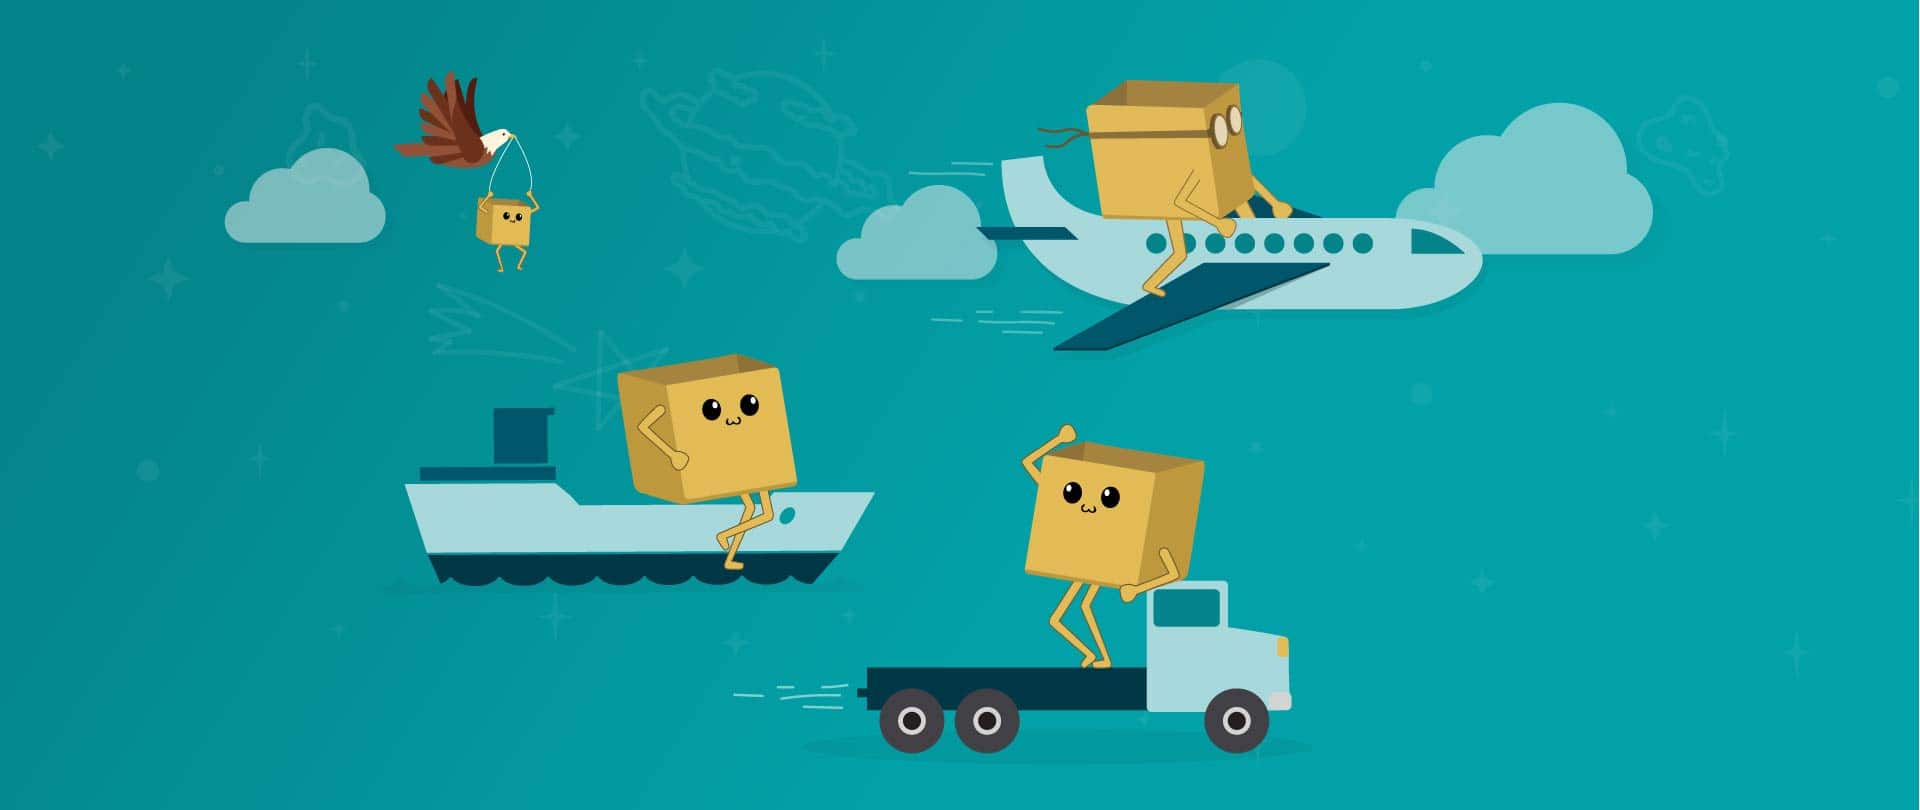 Bob the Box rides on top of each freight option — a plane, a ship, and a truck.